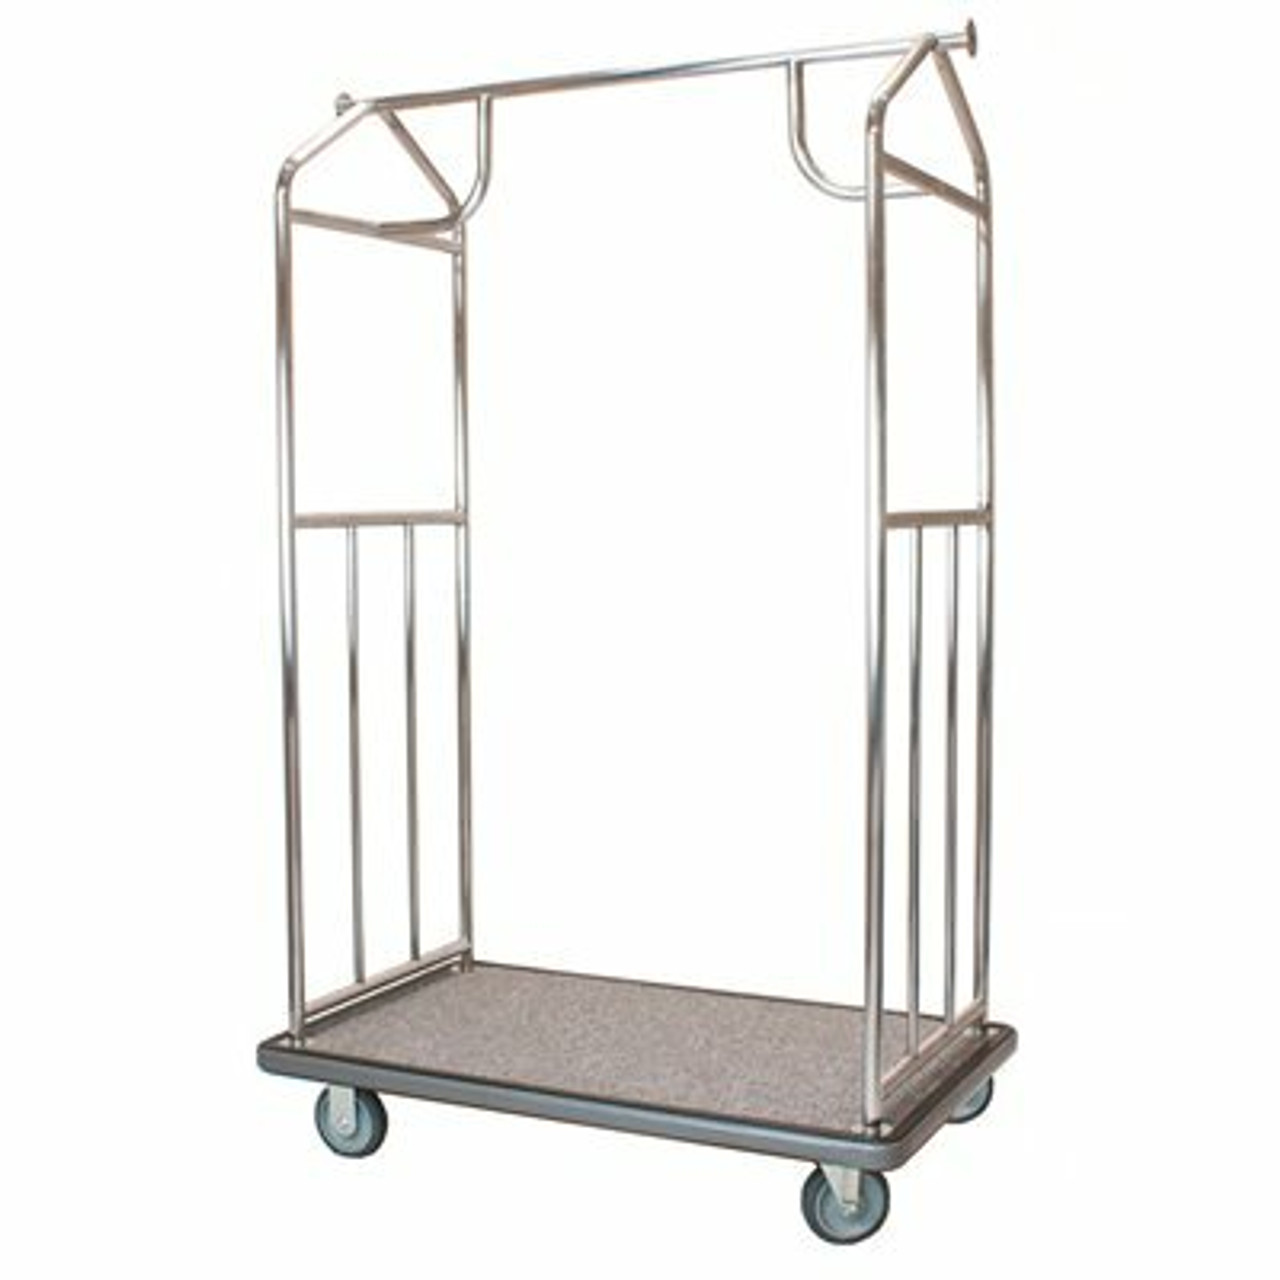 Hospitality 1 Source All-In-One Brushed Stainless Steel Transporter Bellman's Cart With Gray Deck